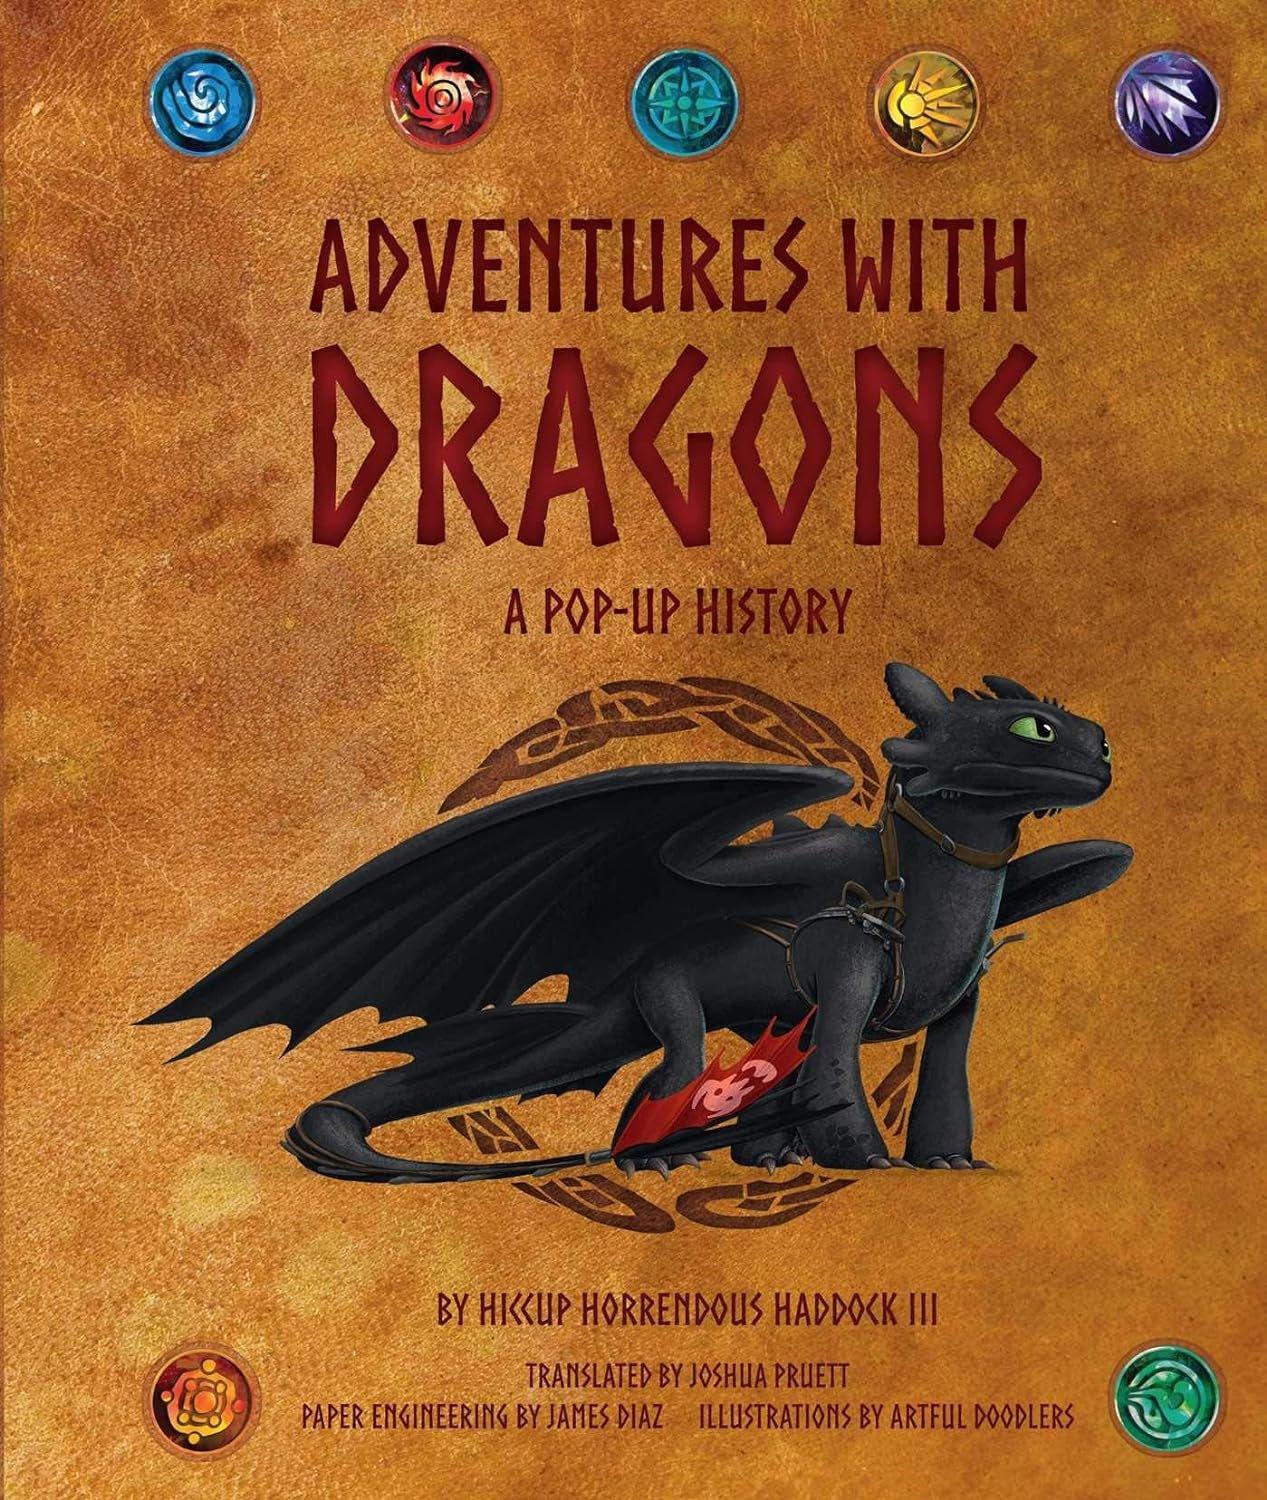 Book cover titled "DreamWorks Dragons: Adventures with Dragons: A Pop-Up History," featuring a black dragon perched on a globe, with colorful icons around the border. Written by Joshua Pruett (Author), James Diaz